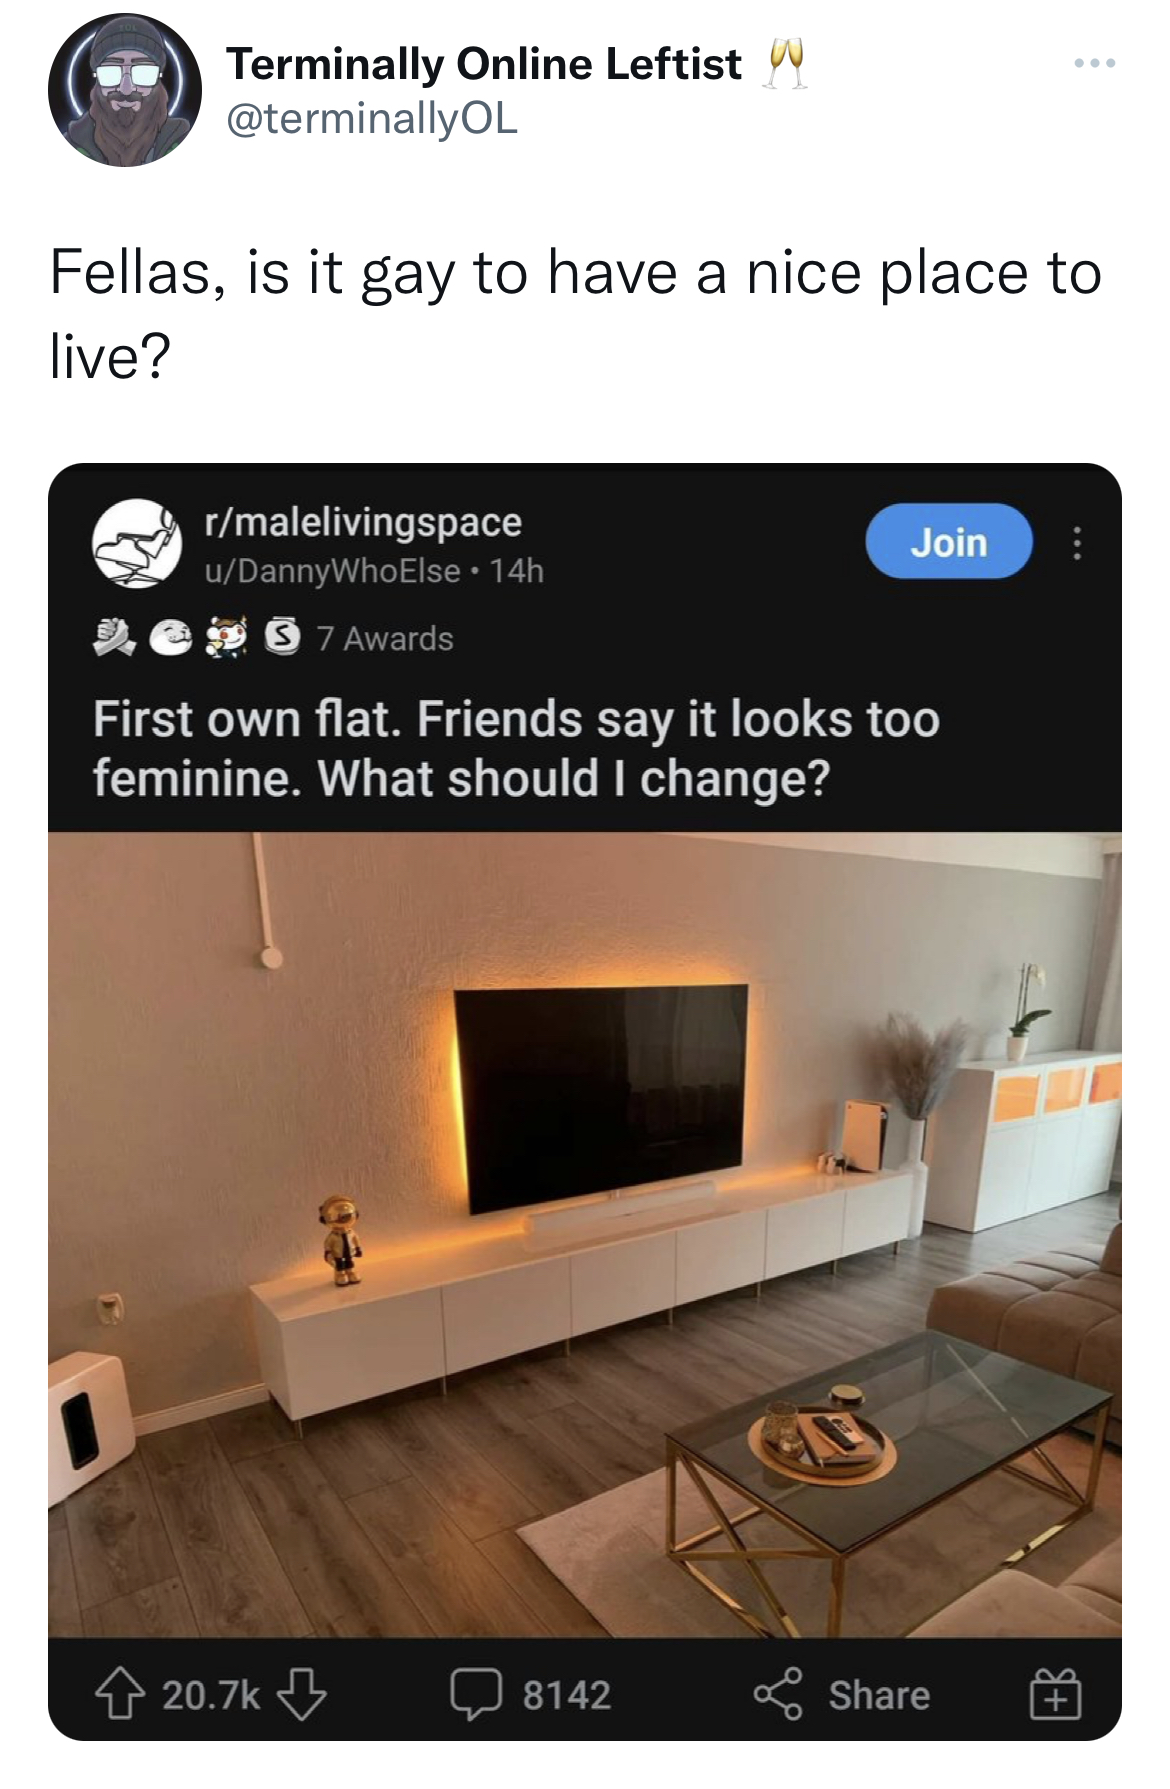 funny and dirty tweets - multimedia - Terminally Online Leftist Fellas, is it gay to have a nice place to live? rmalelivingspace uDannyWhoElse 14h 2 7 Awards First own flat. Friends say it looks too feminine. What should I change? day Join 8142 B